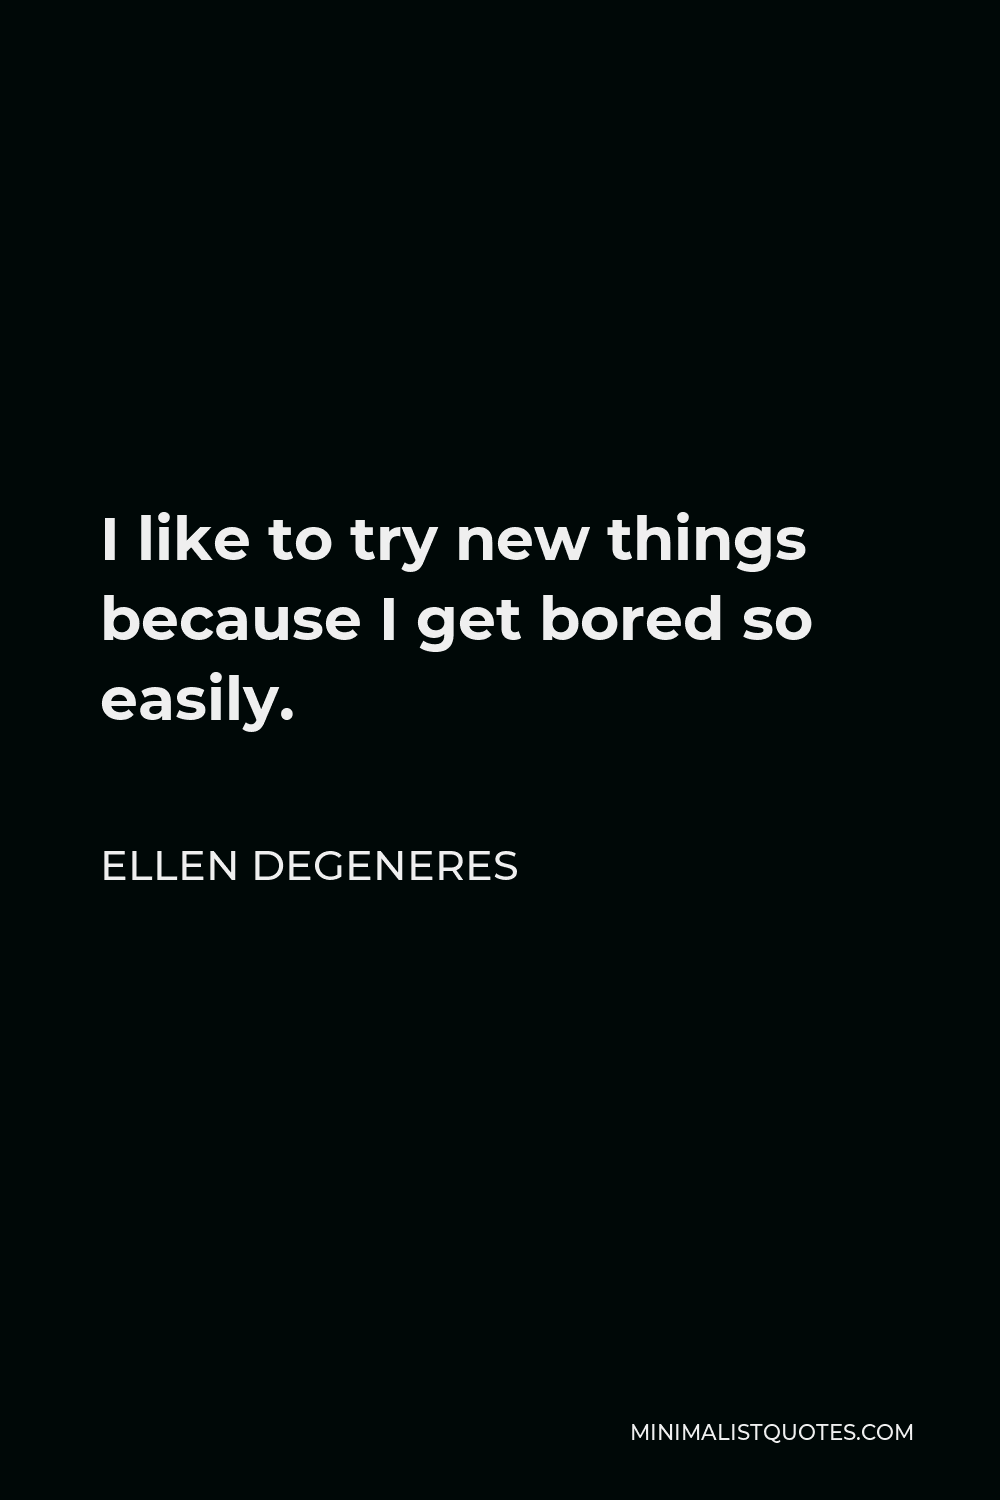 Ellen DeGeneres Quote - I like to try new things because I get bored so easily.